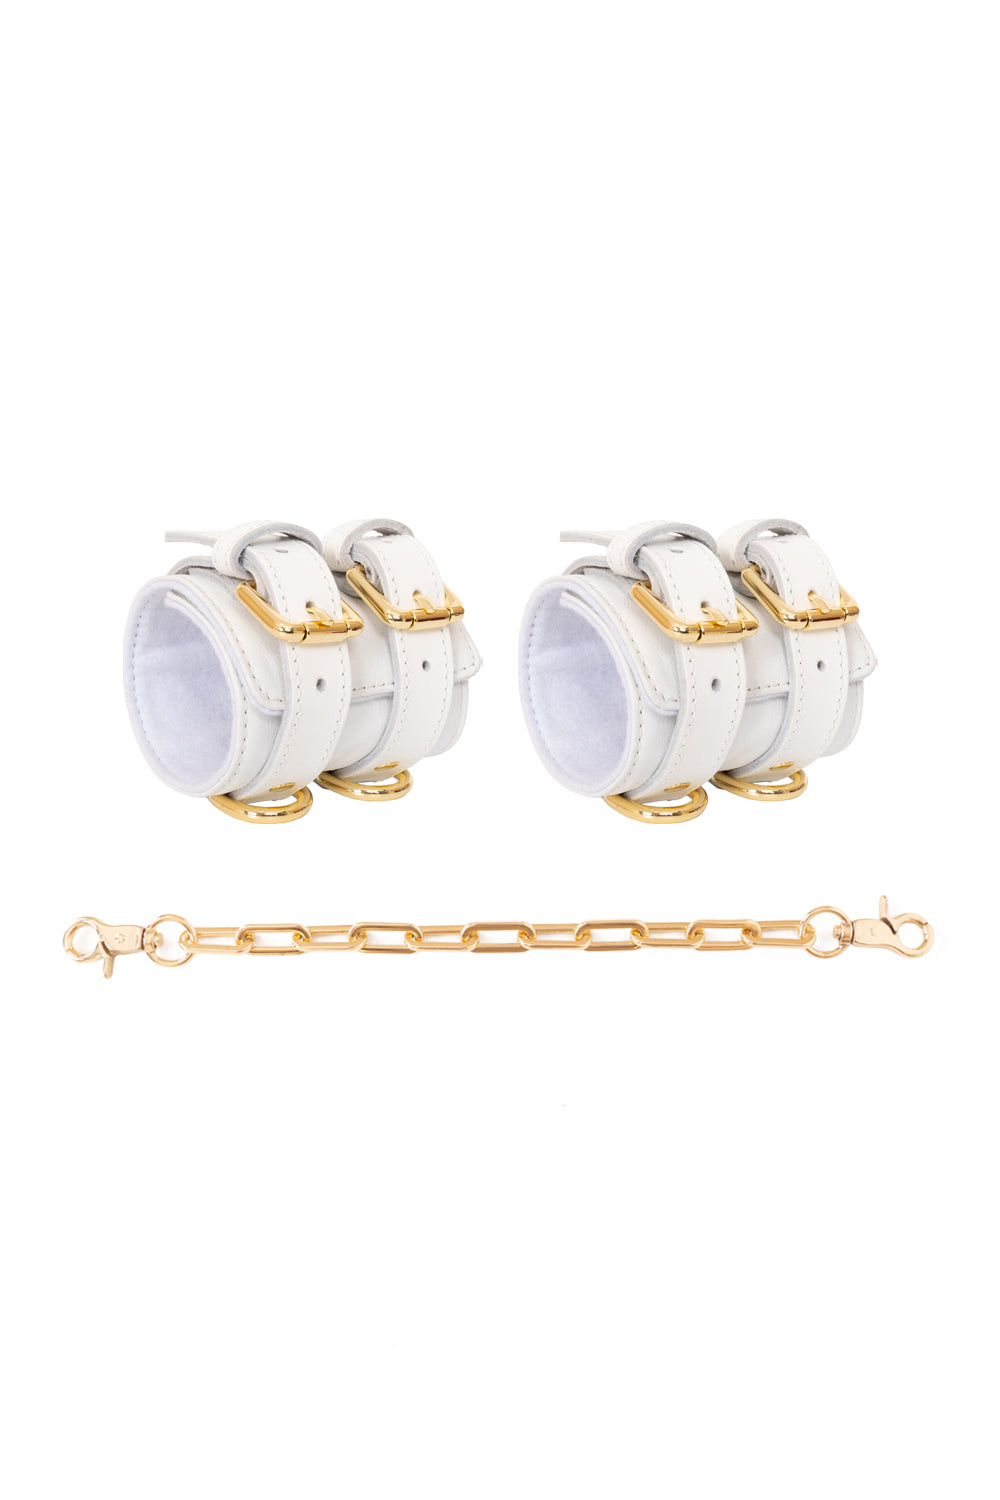 Hand, Ankle cuffs Wide with chain connectors.